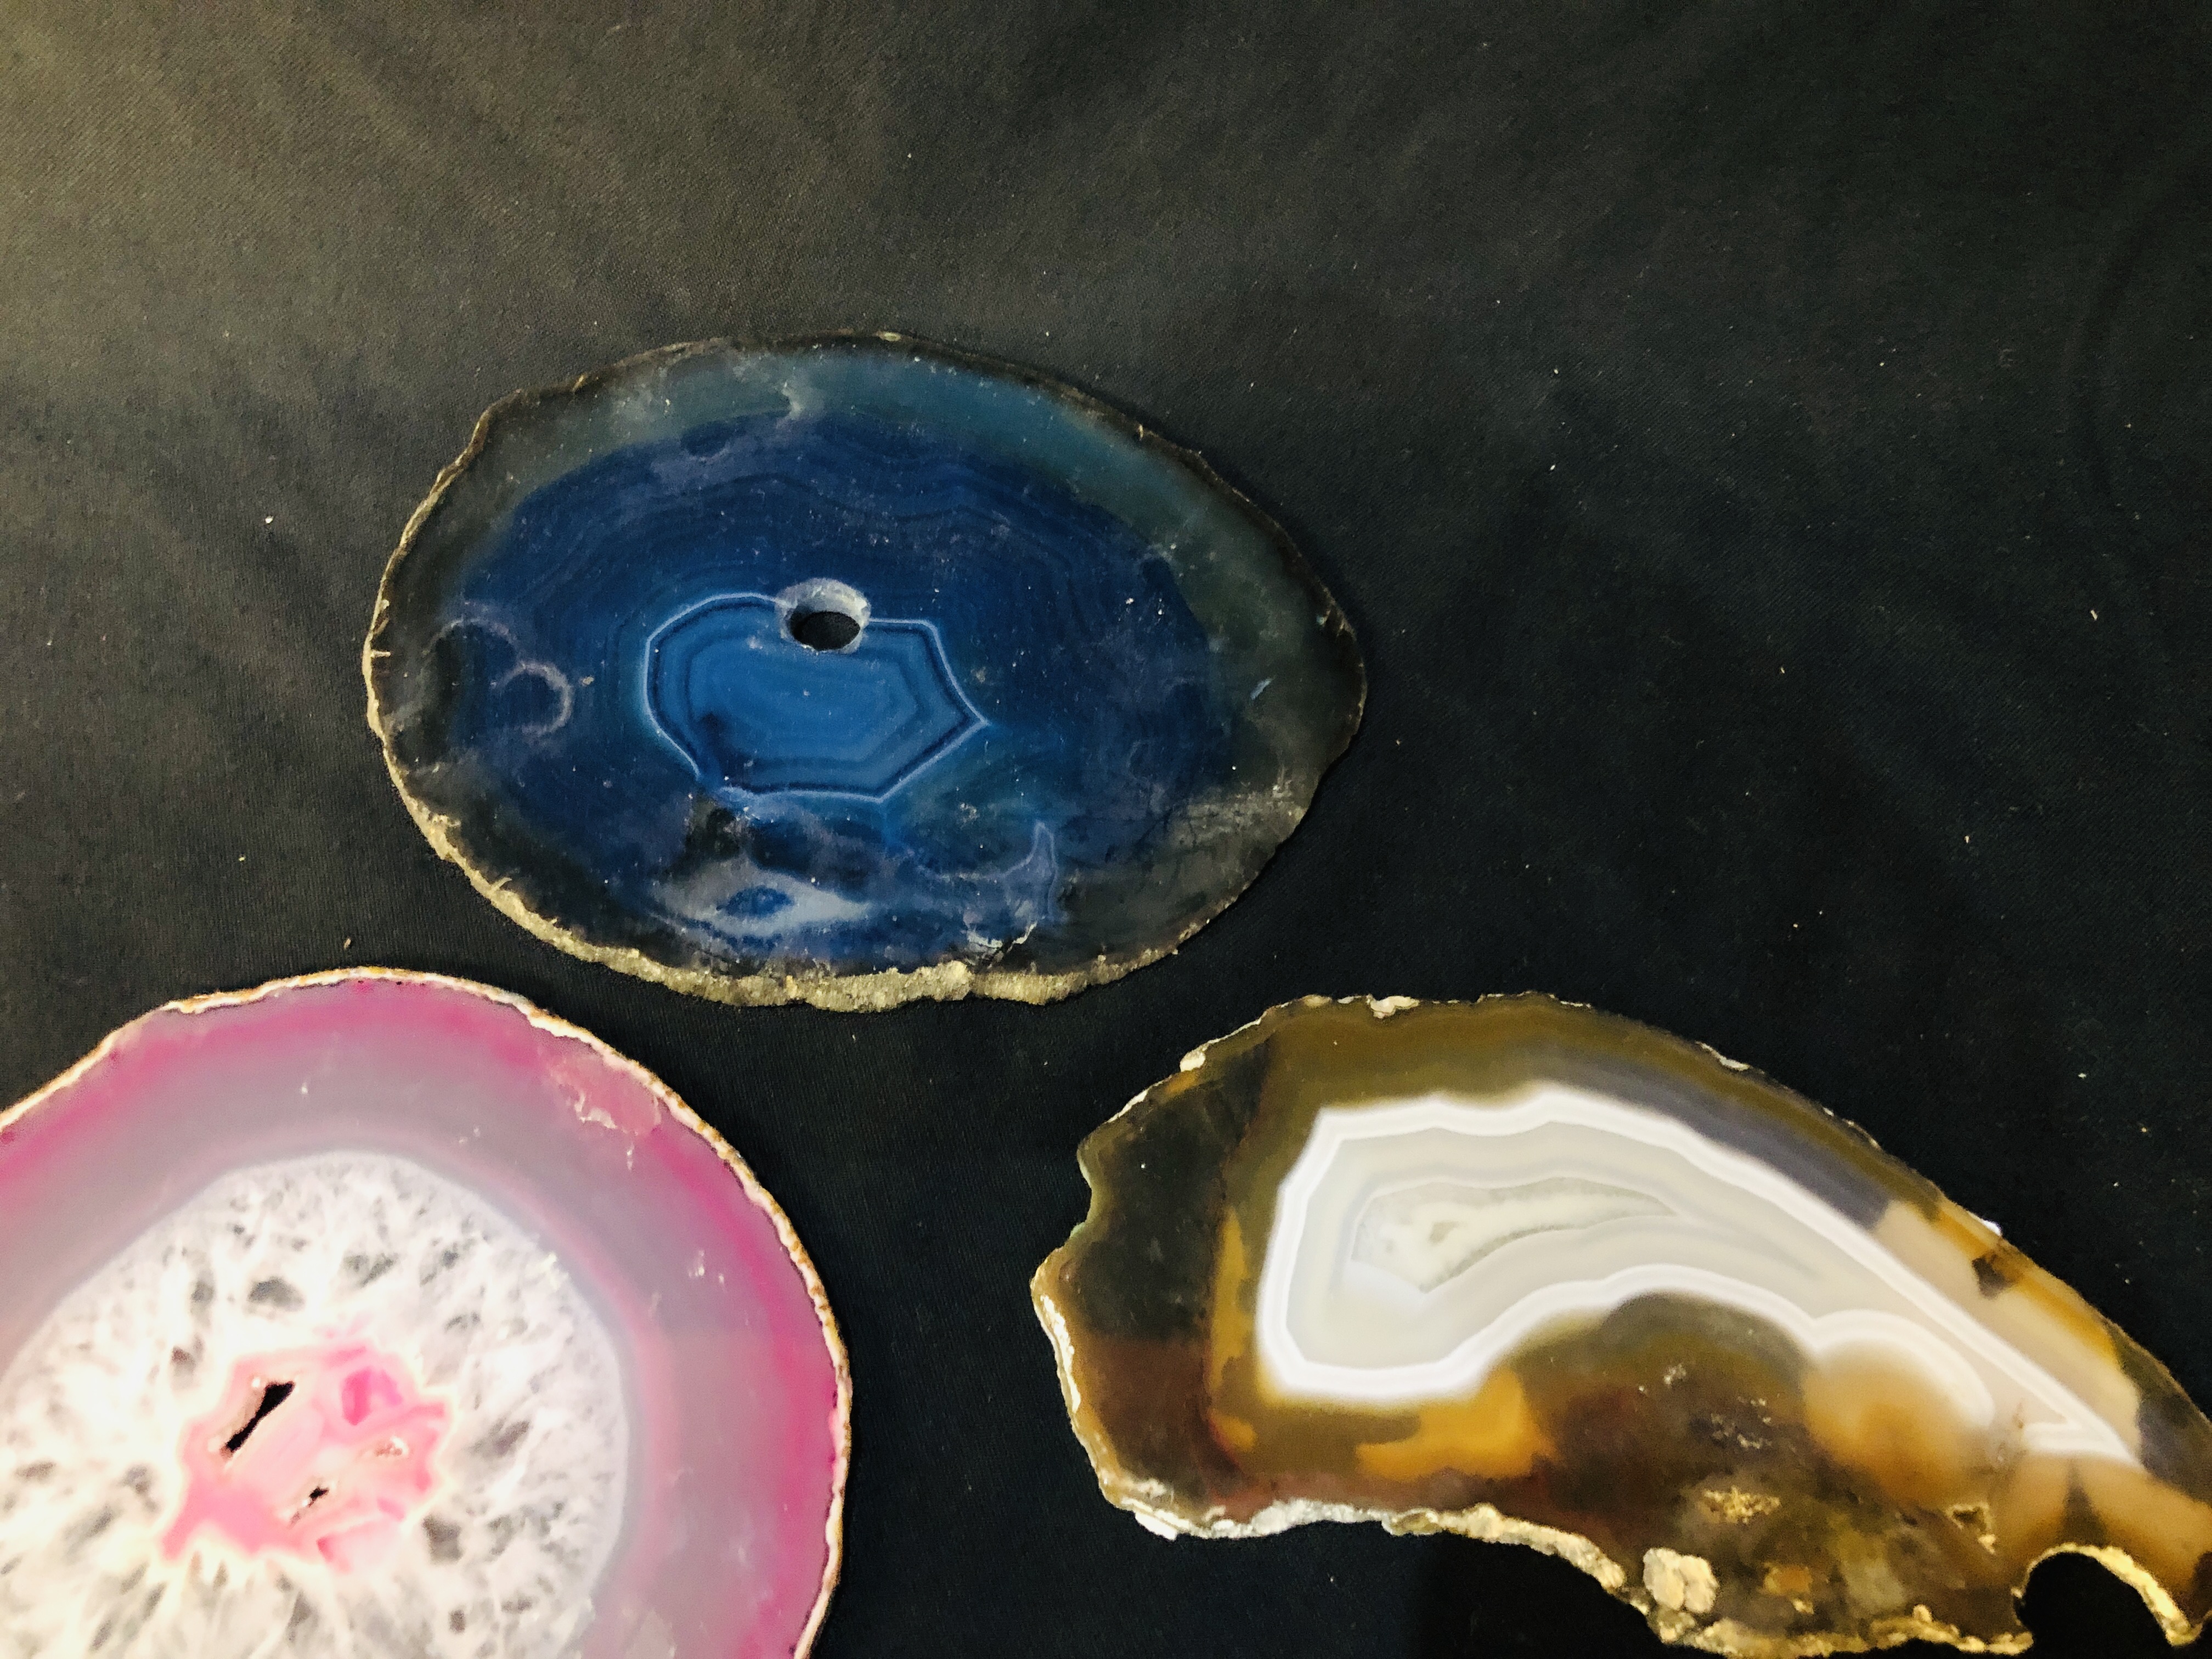 A COLLECTION OF APPROX 7 POLISHED AGATE SLICES TO INCLUDE BLUE LACEETC. - Image 3 of 4